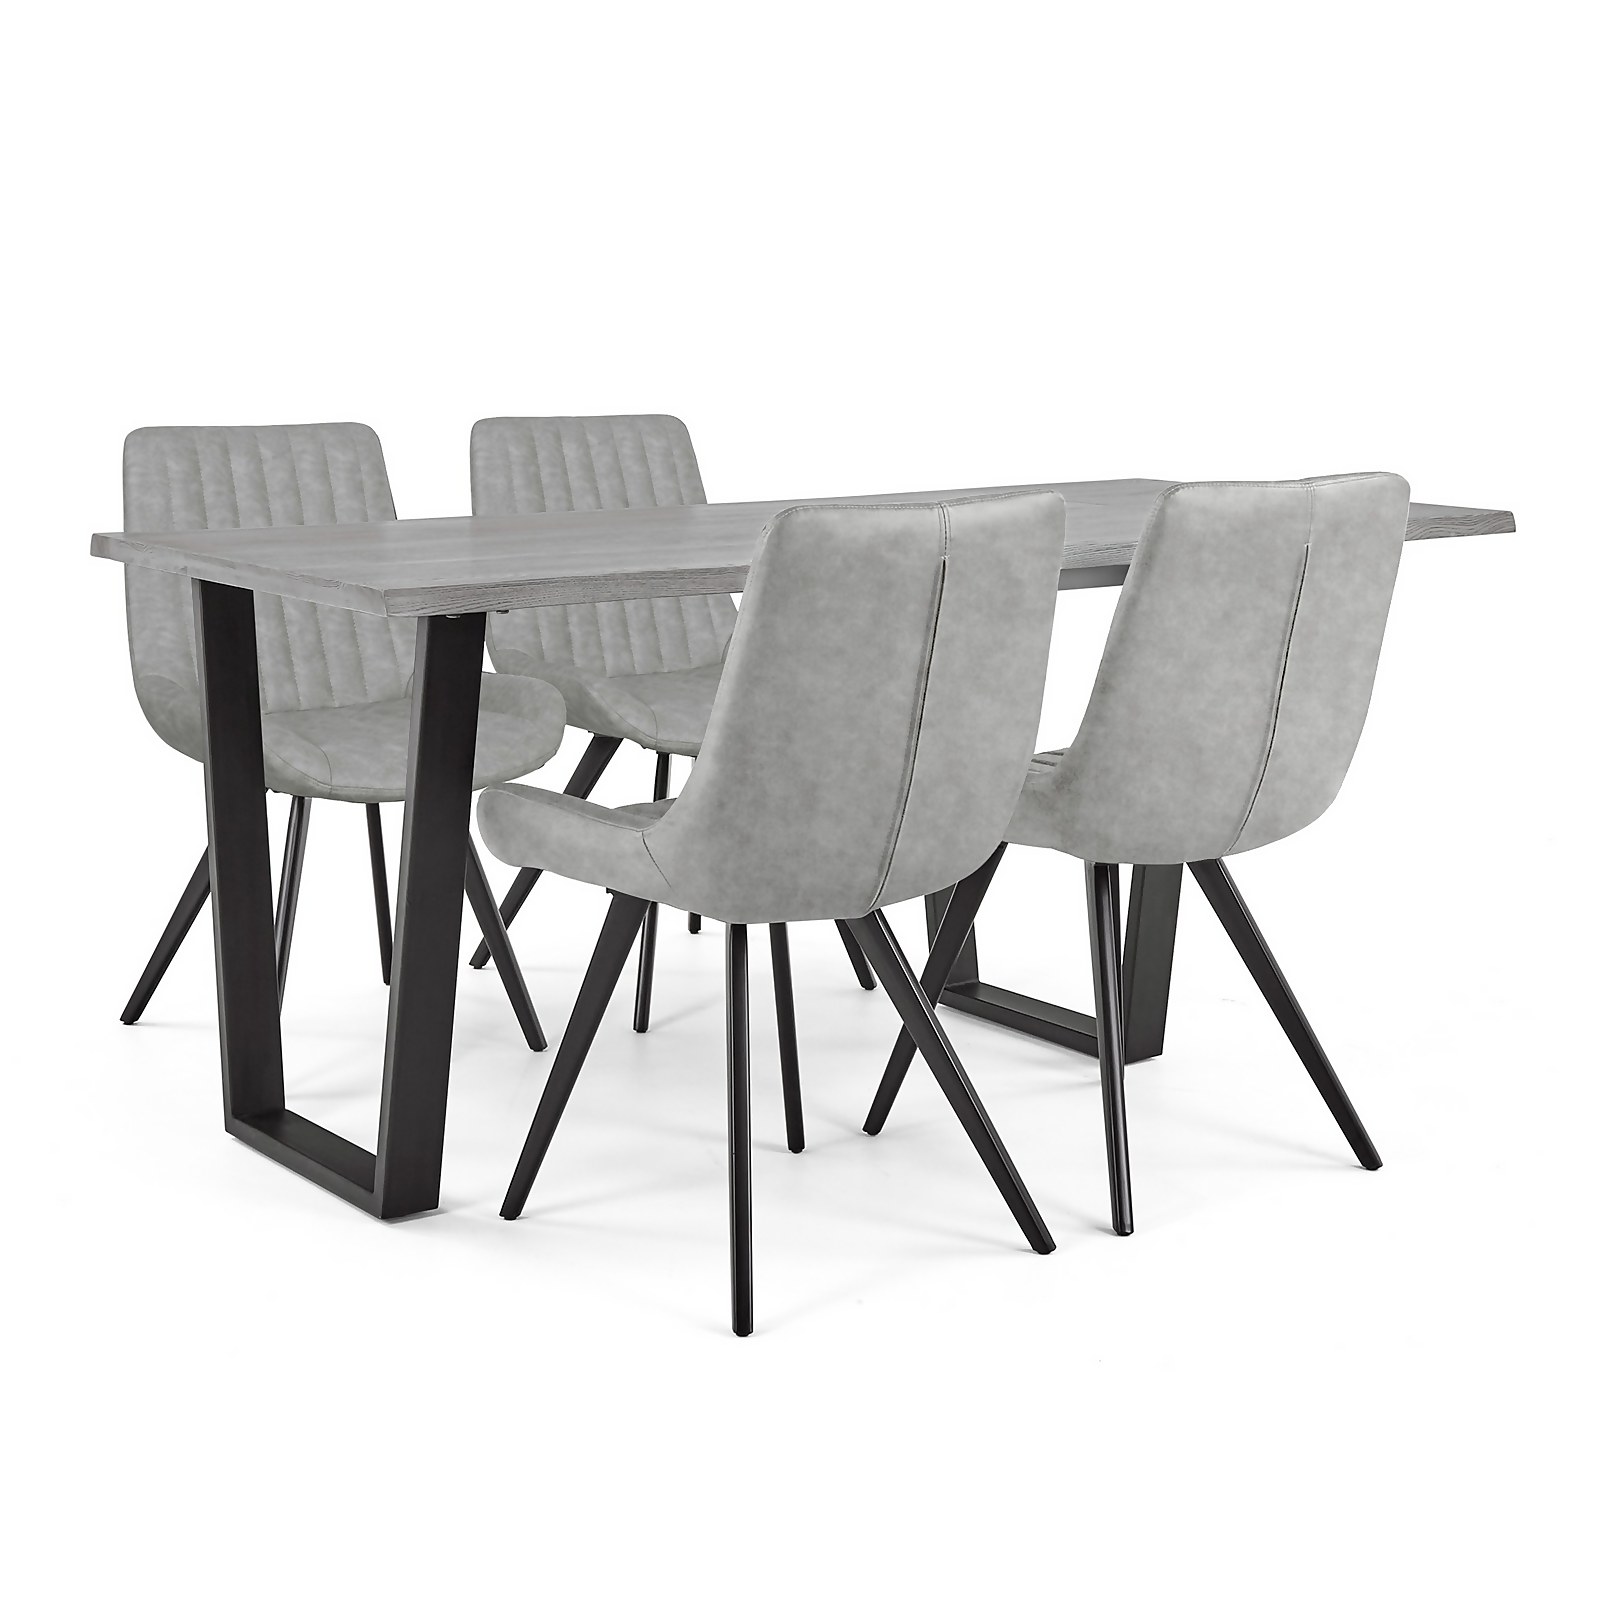 Photo of Dalston Dining Table And 4 Chairs - Silver